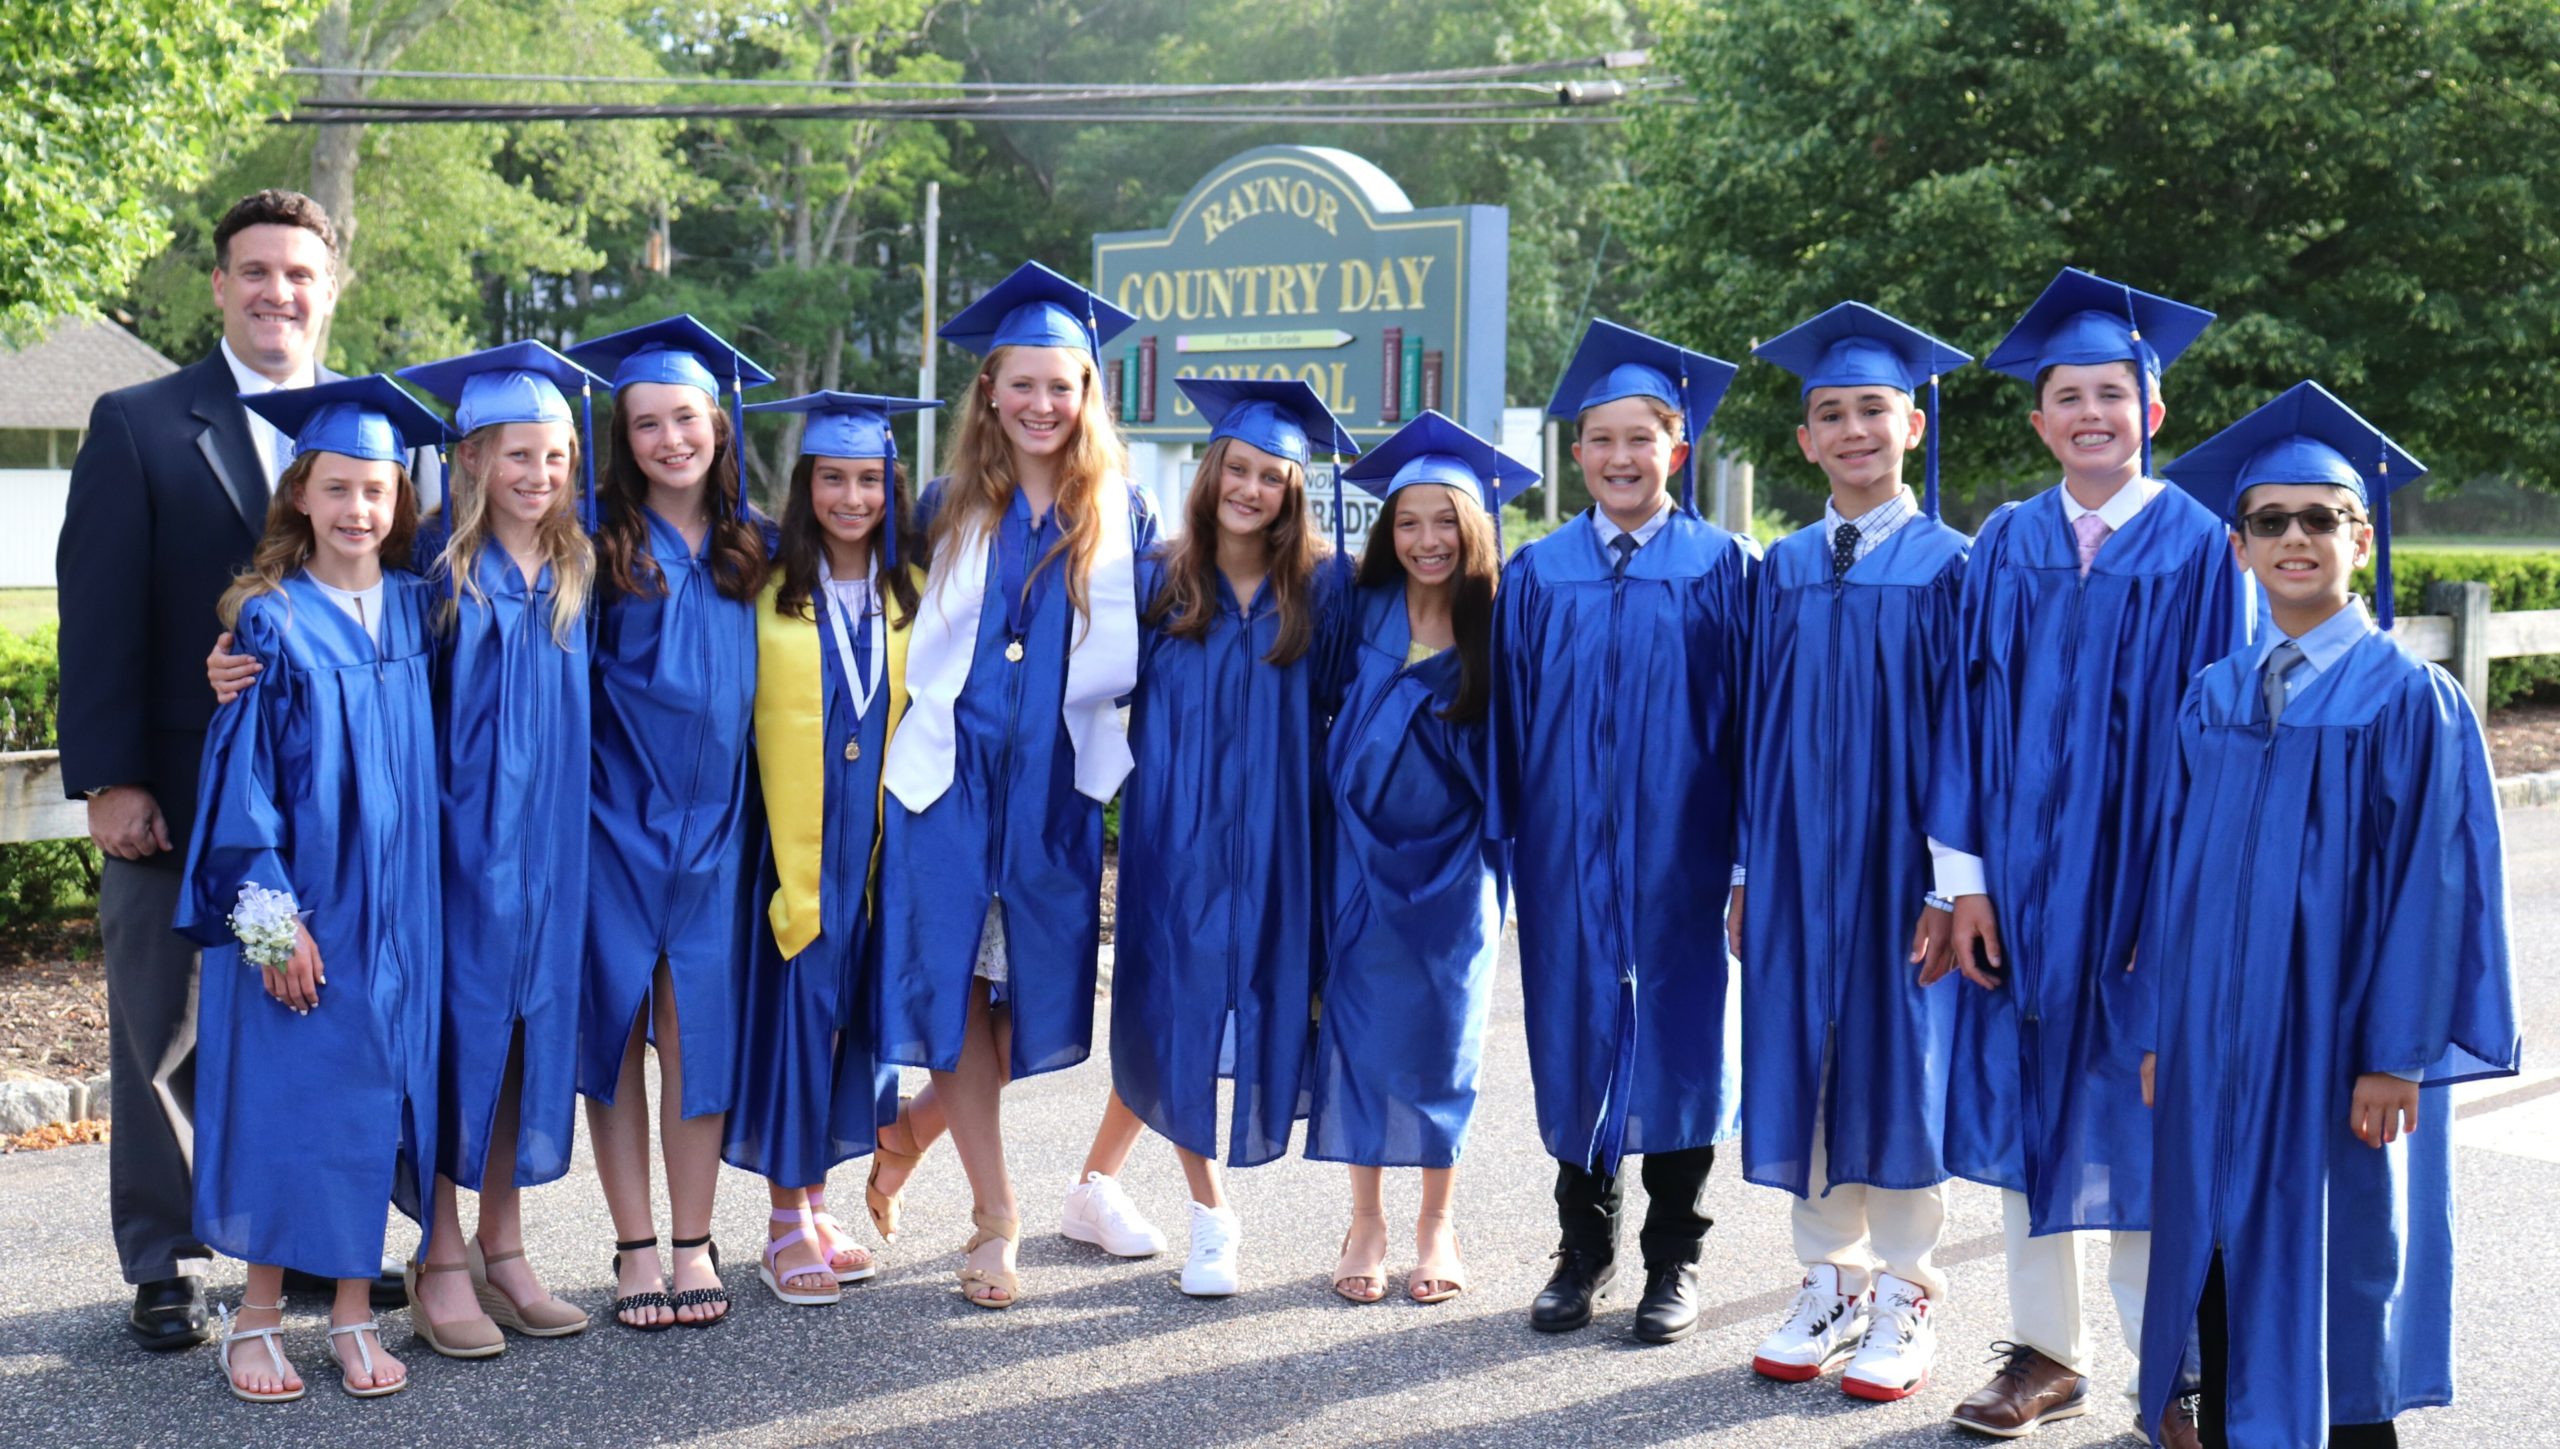 The Raynor Country Day School recently celebrated its sixth-grade graduating class last week.